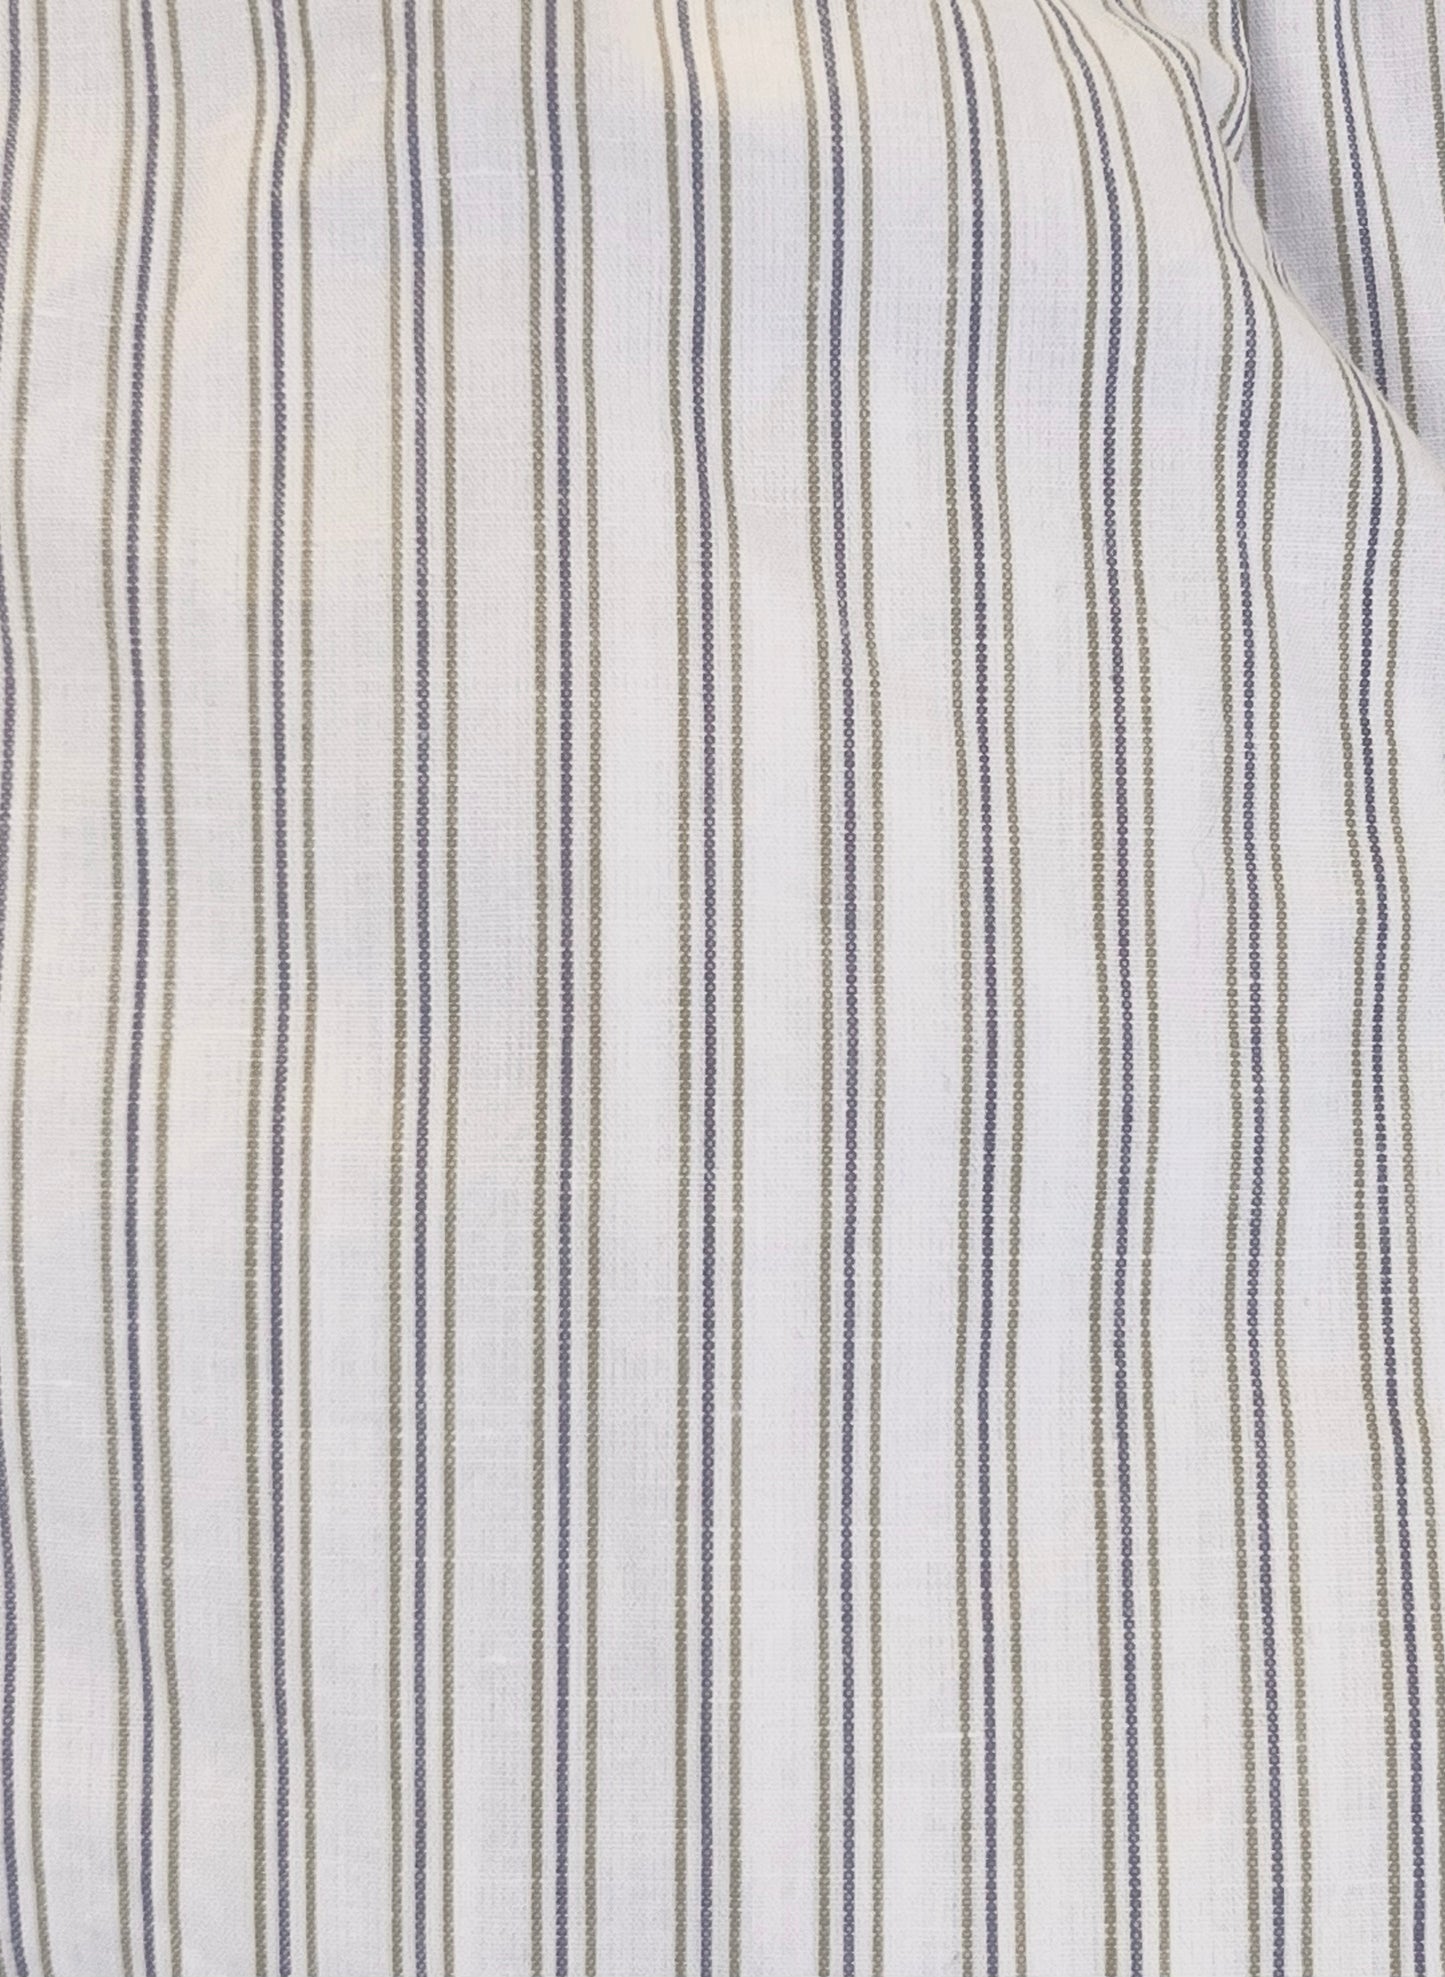 Close up of Ease Trouser - Story Stripe fabric by Deiji Studios